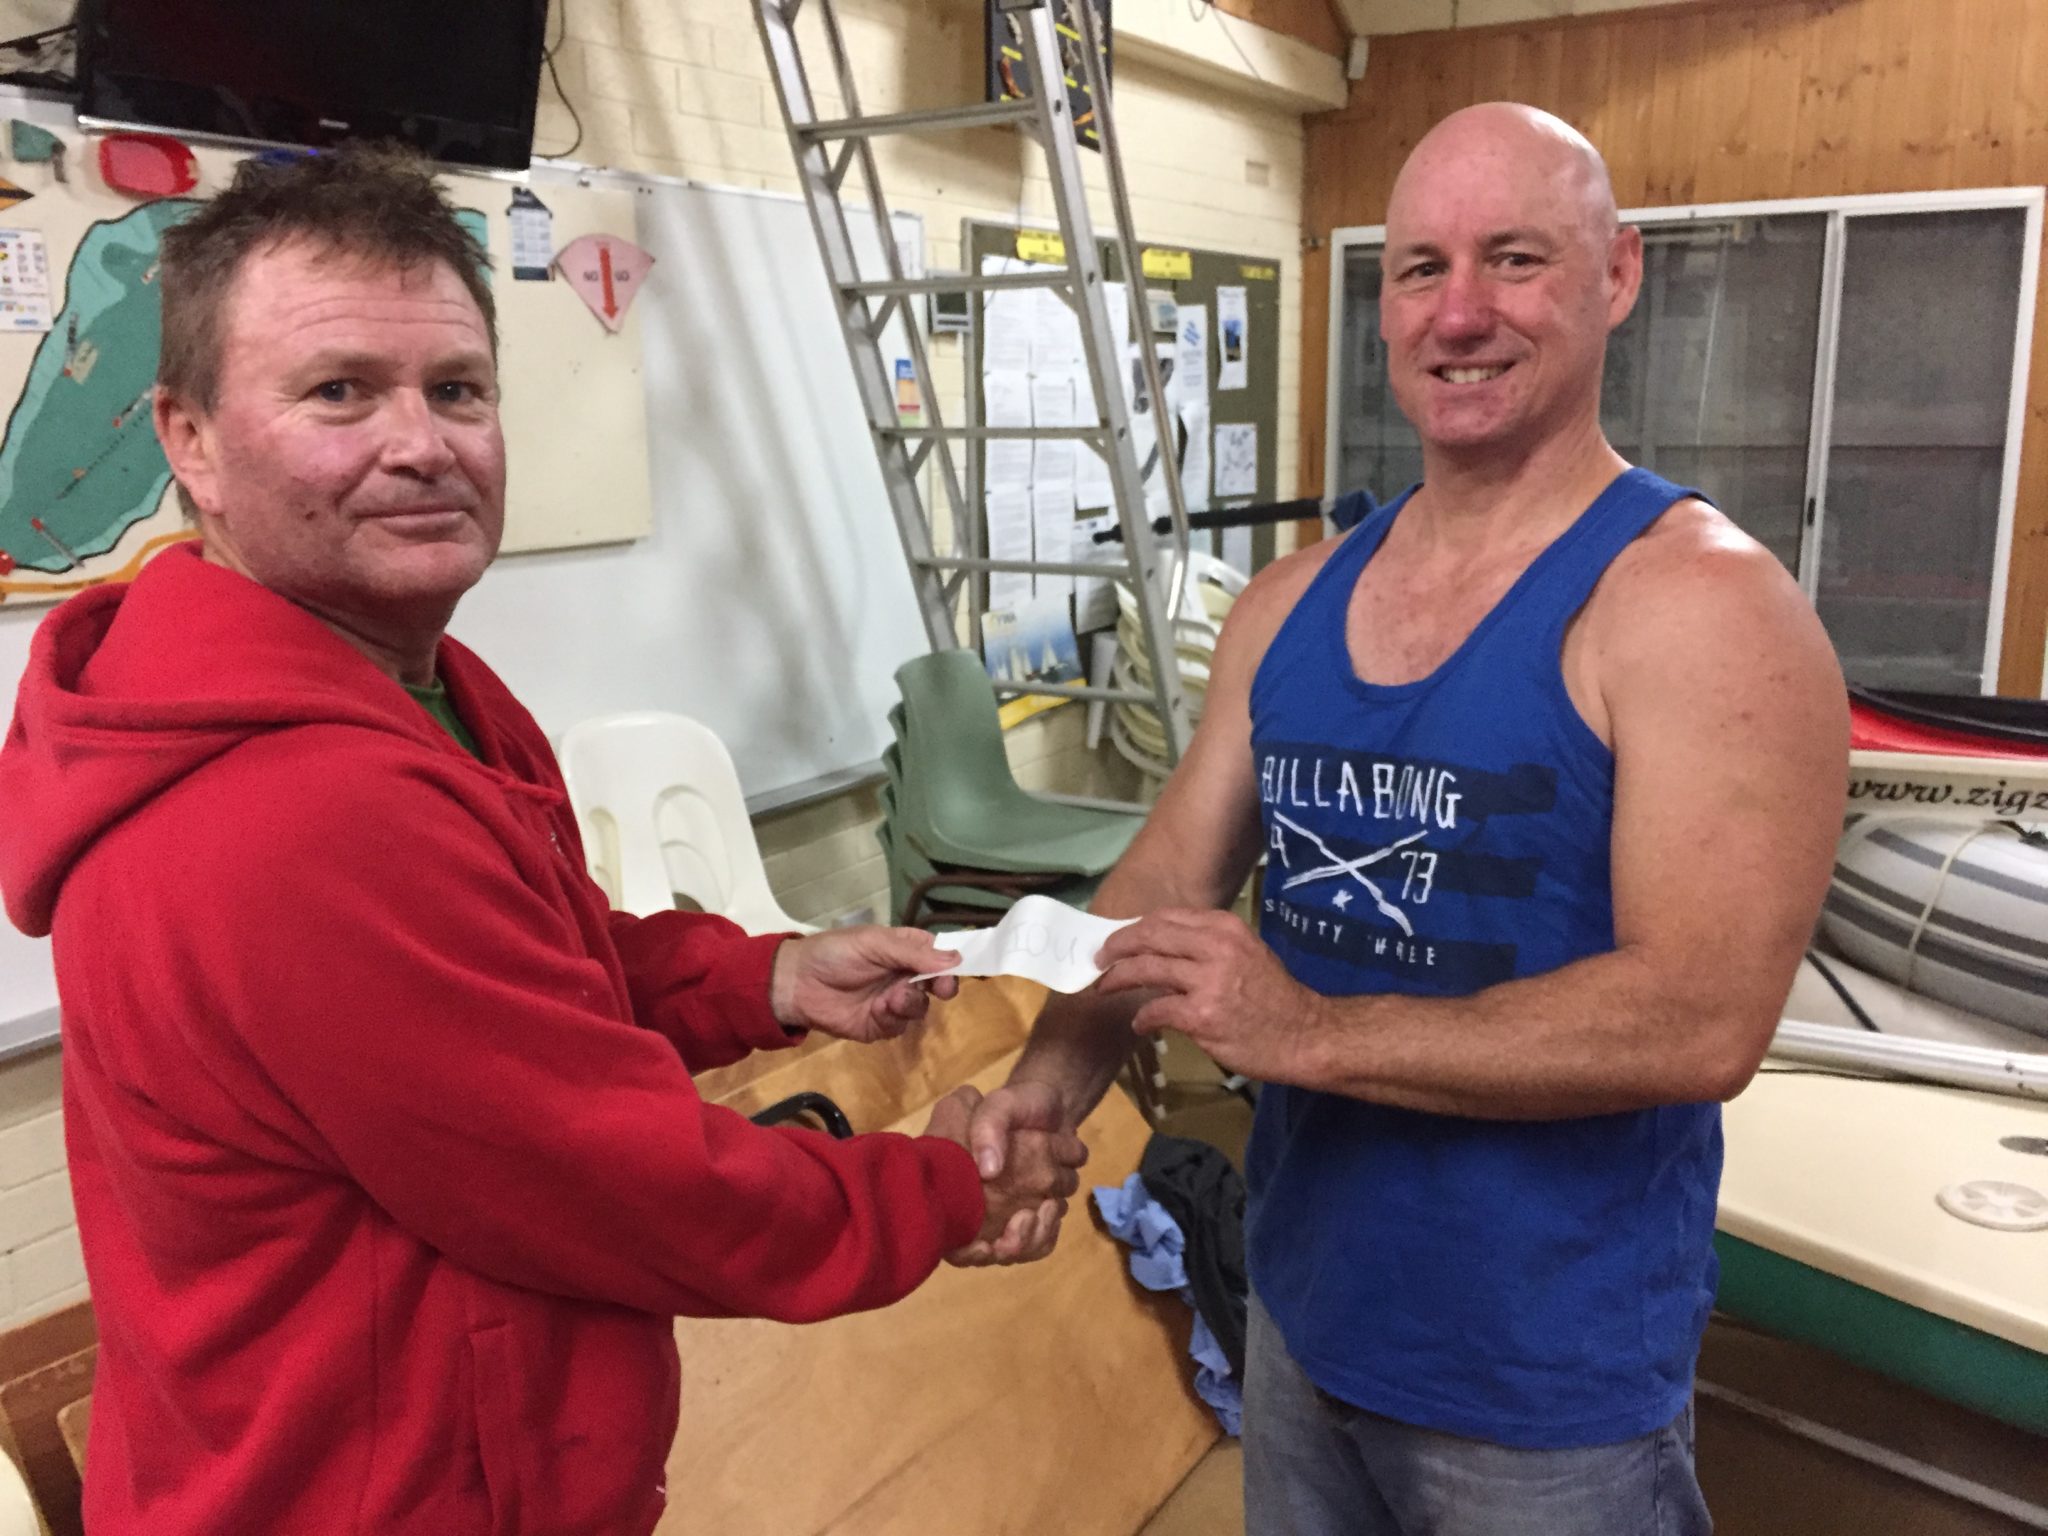 Tues 20th June 2017 : Tonight's photo shows club member Francis Nolan presenting Greg with a movie voucher